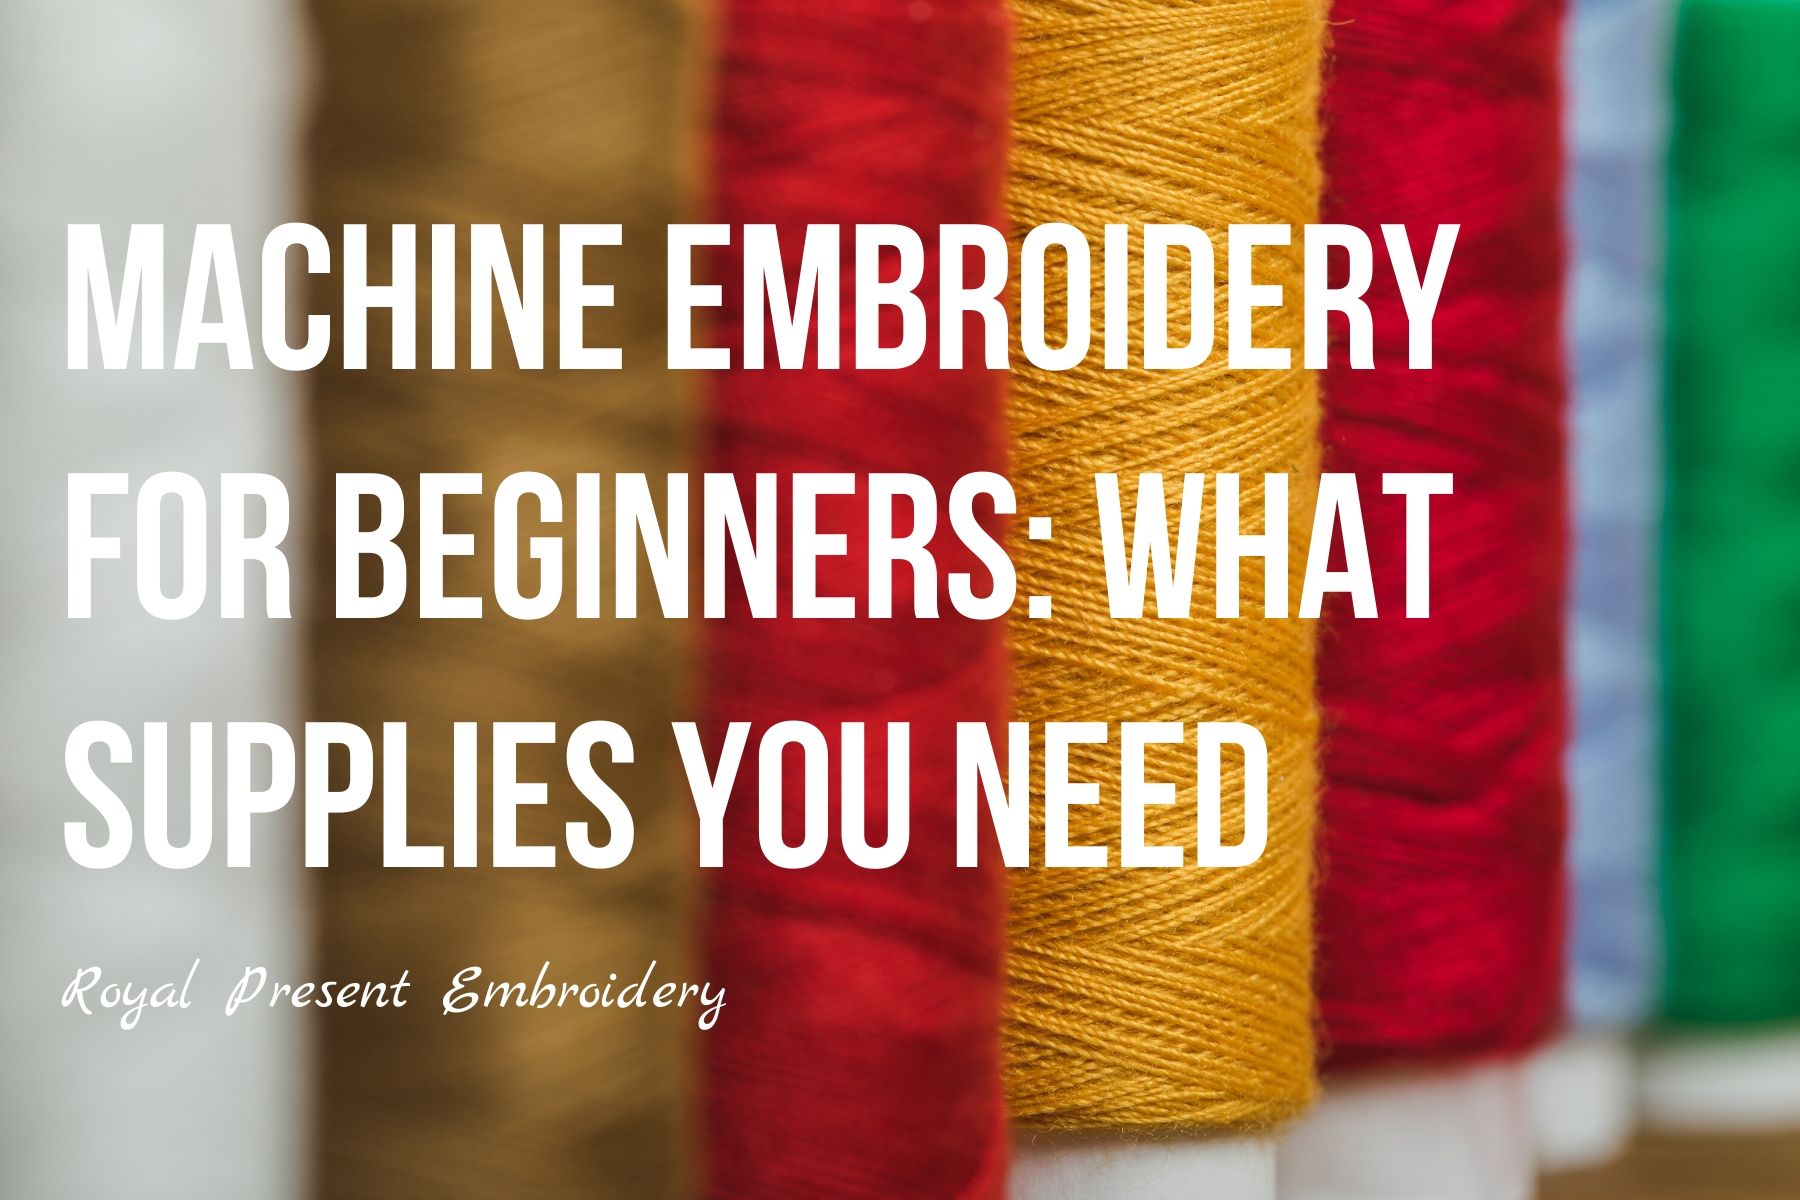 8 Essential Embroidery Supplies (List For Beginners)